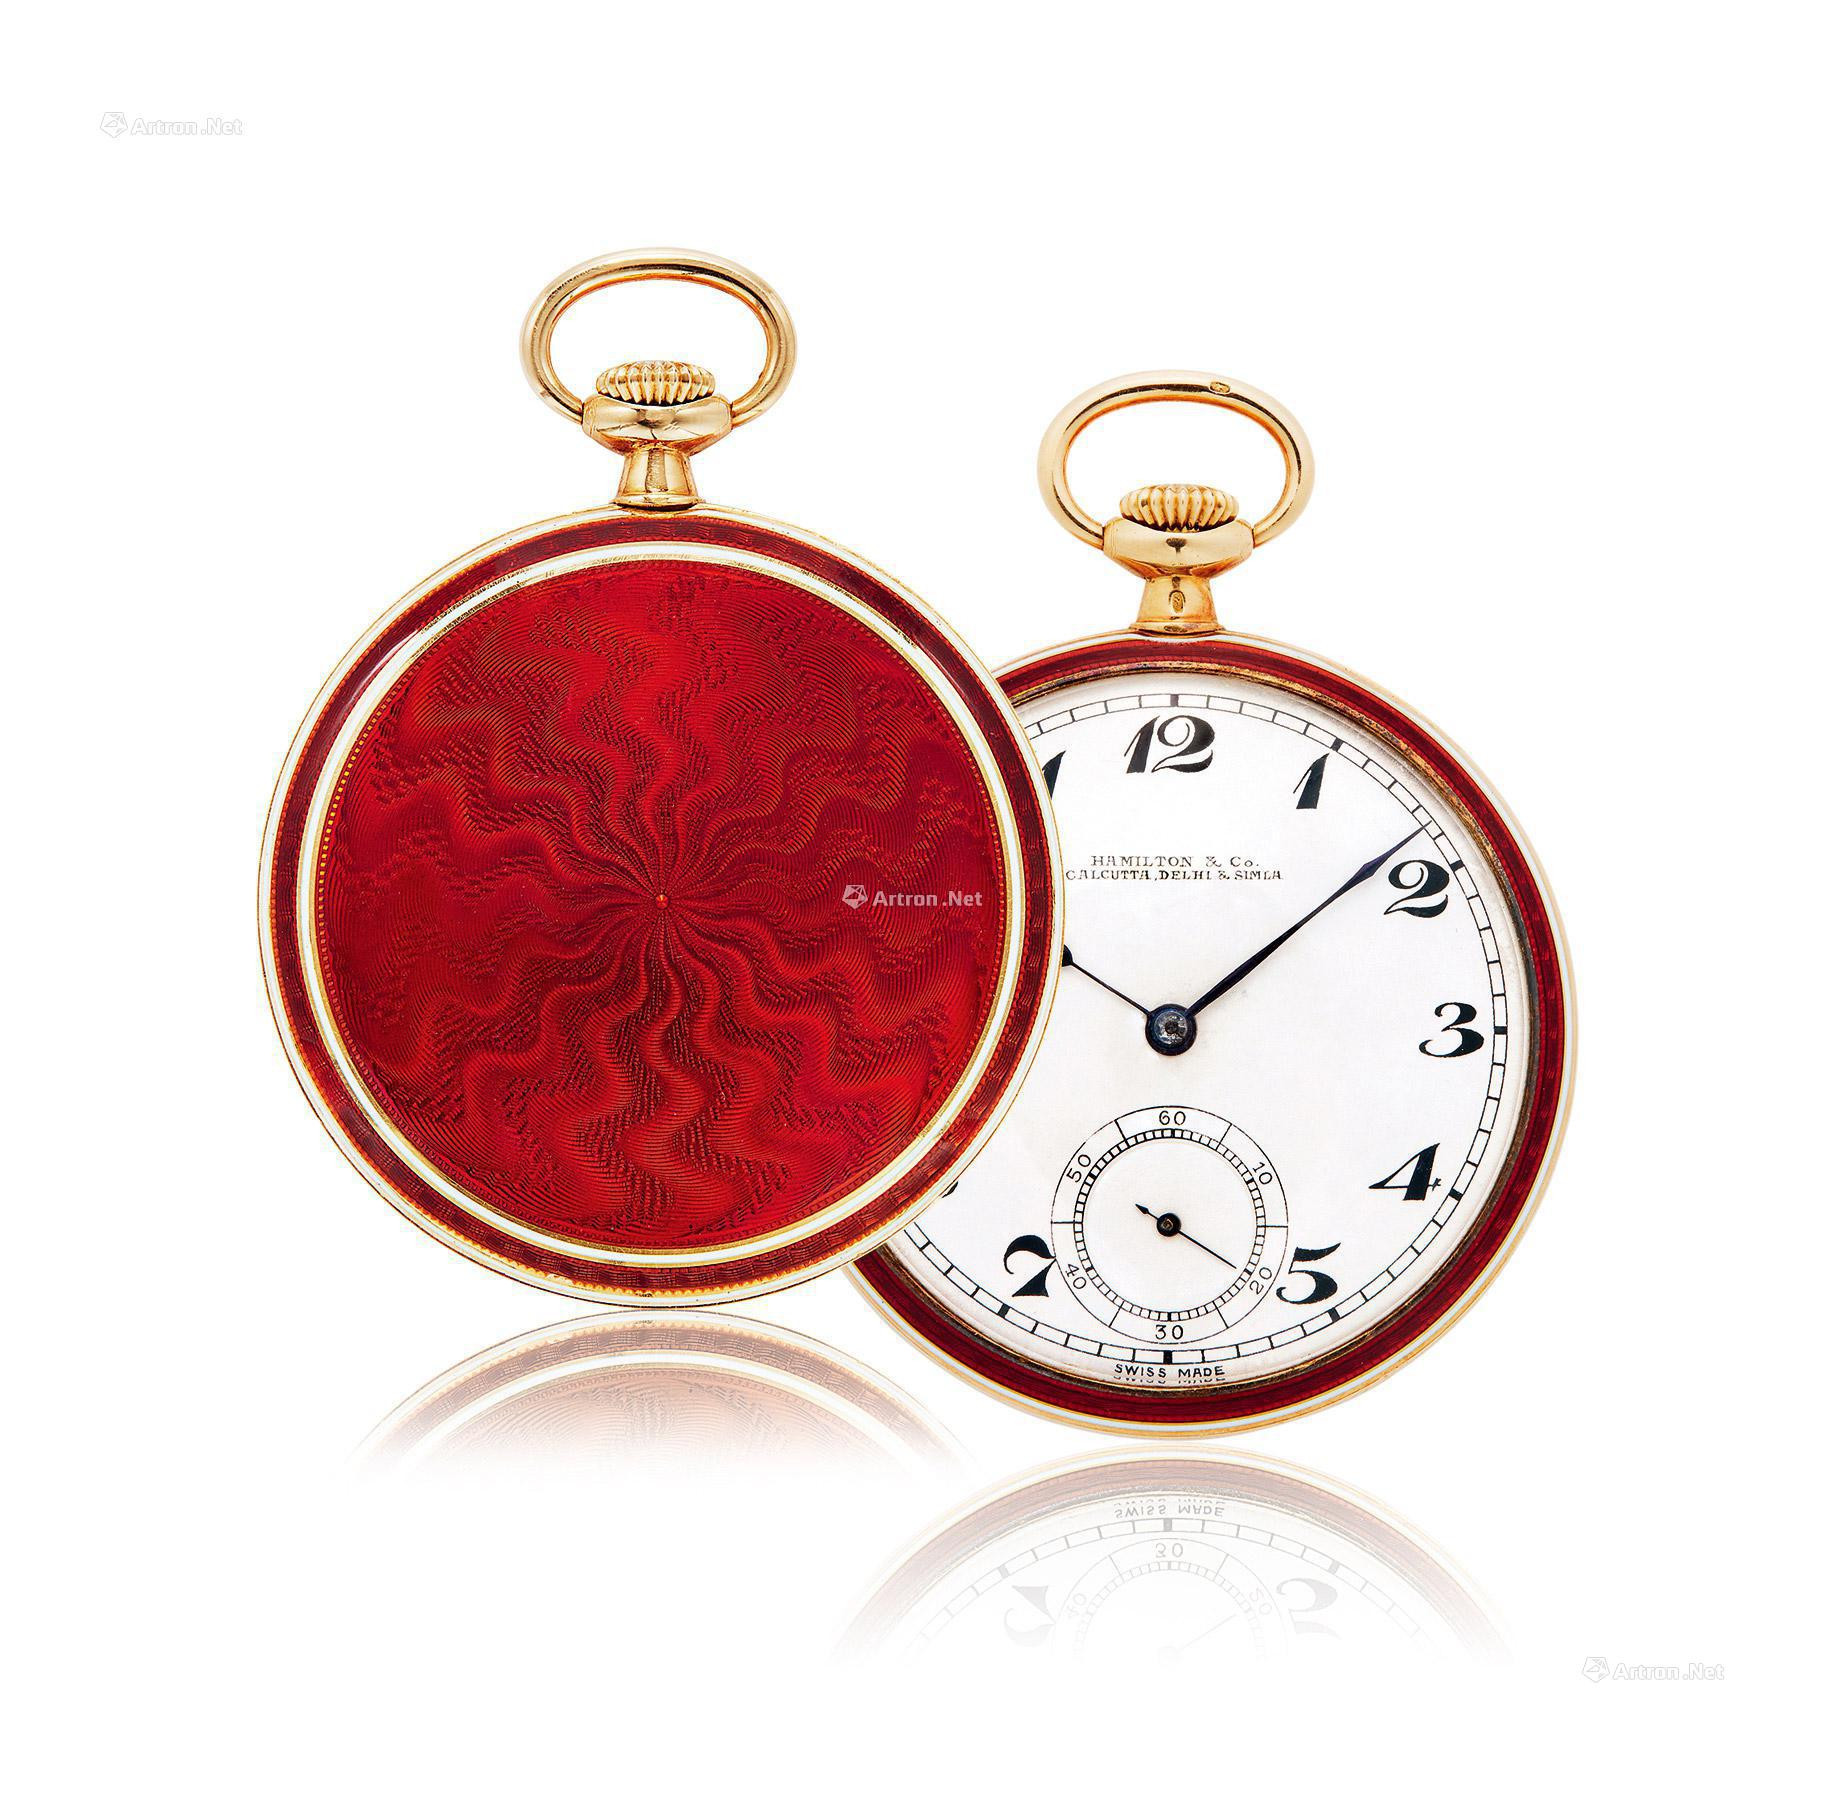 SWITZERLAND  A VINTAGE YELLOW GOLD OPEN-FACED MECHANICAL POCKET WATCH， WITH SMALL SECONDS AND ENAMEL CASE BACK